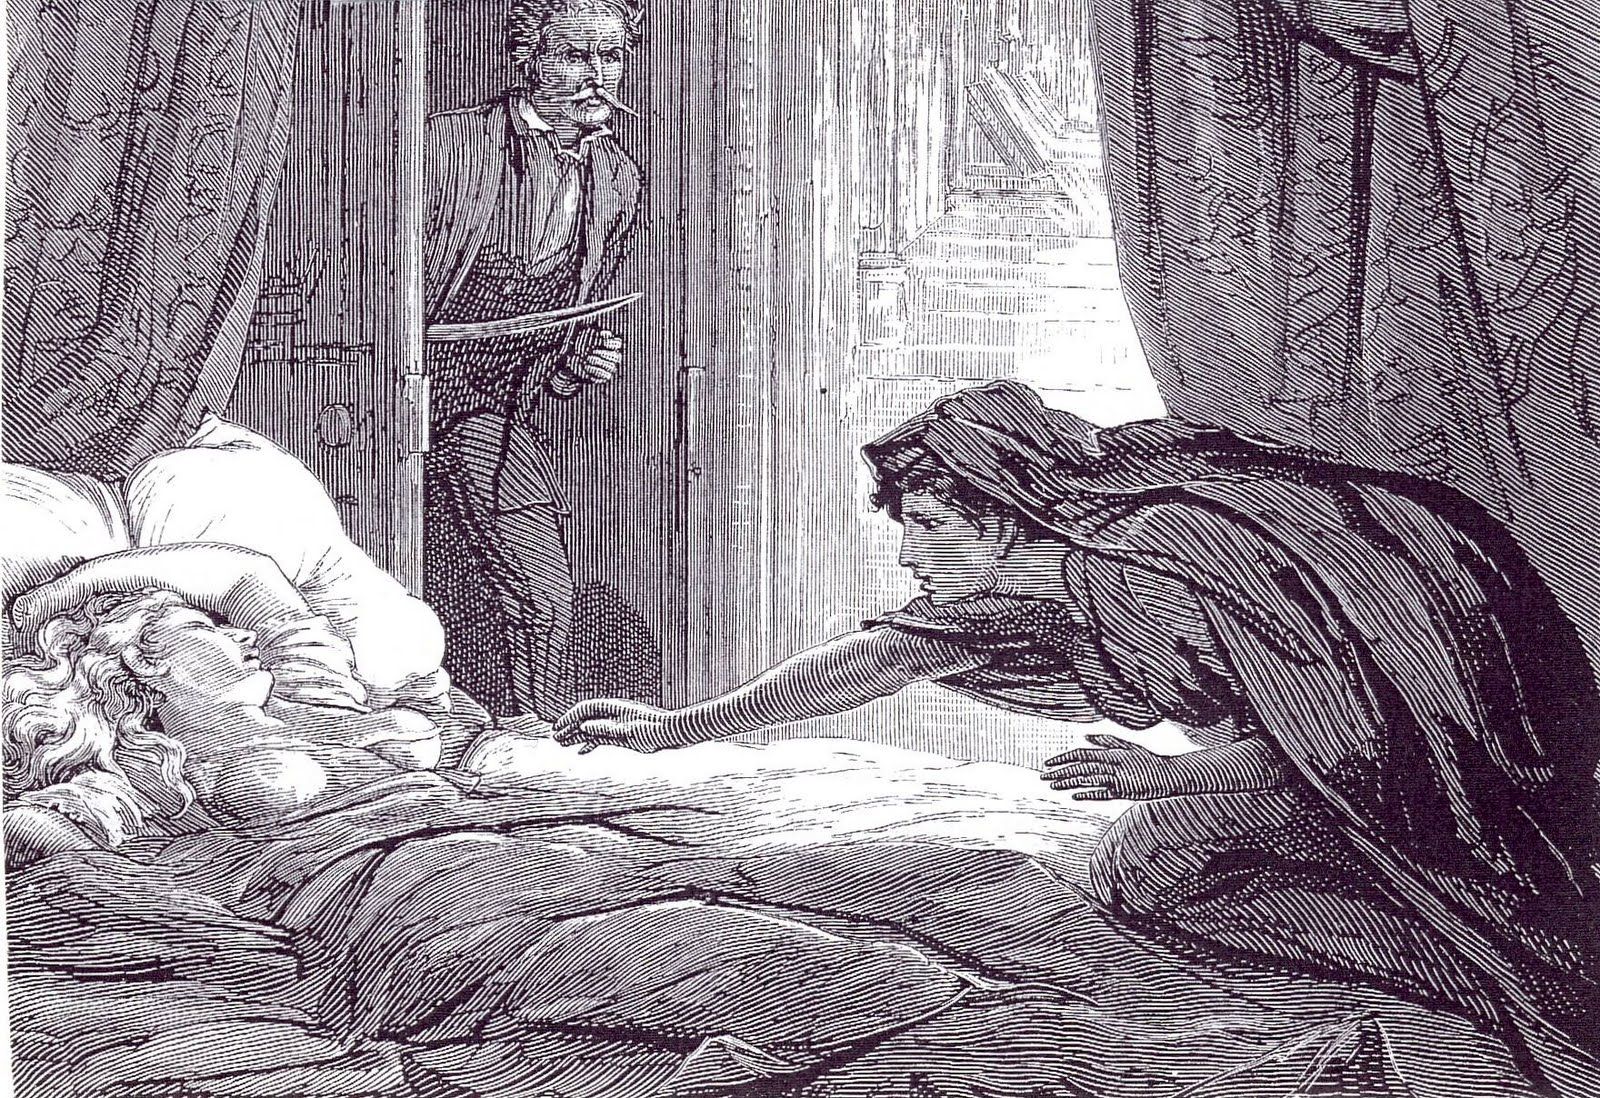 Unruly female sexuality: an illustration by D. H. Friston for Carmilla (1872) (Wikimedia Commons)